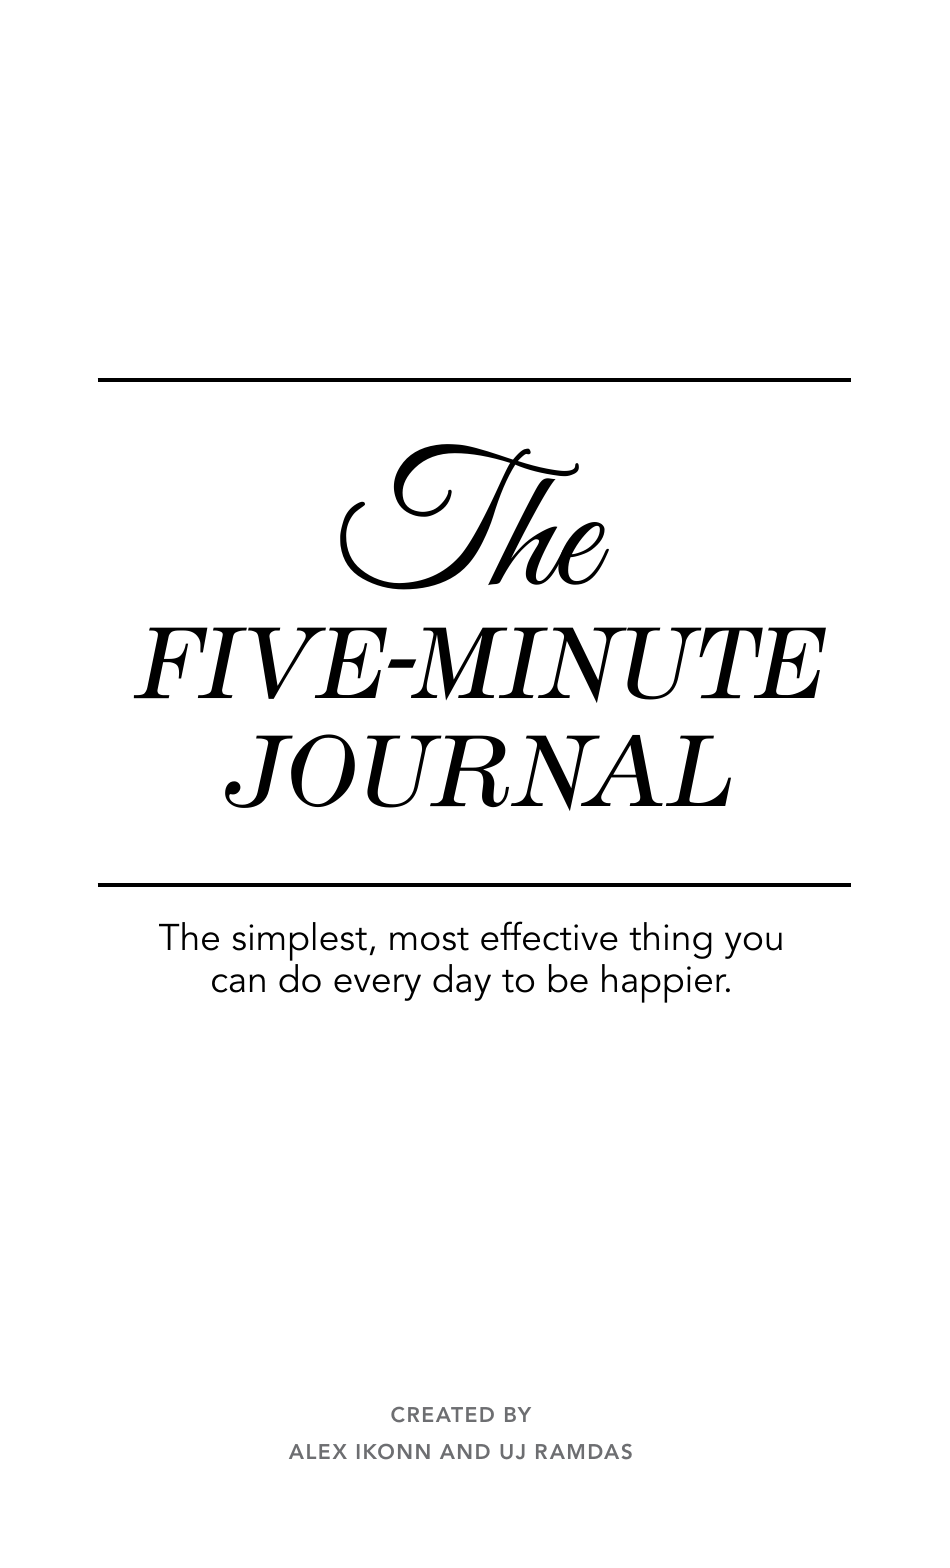 Five-Minute Journal - A revolutionary tool for personal growth and gratitude practice